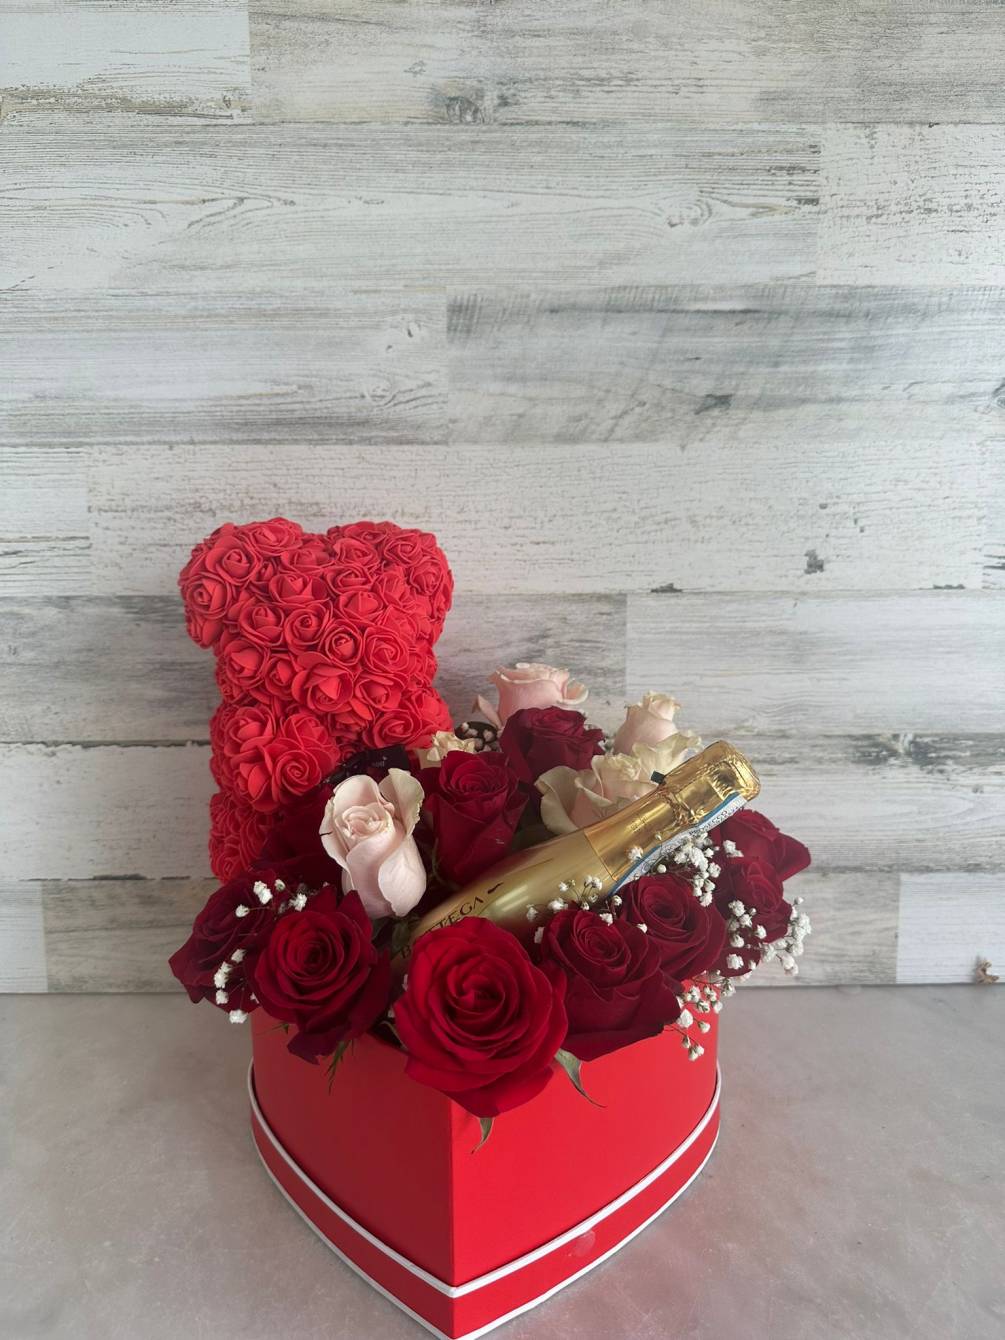 ROSES IN A HEART SHAPE WITH A FOAM ROSES BEAR AND A